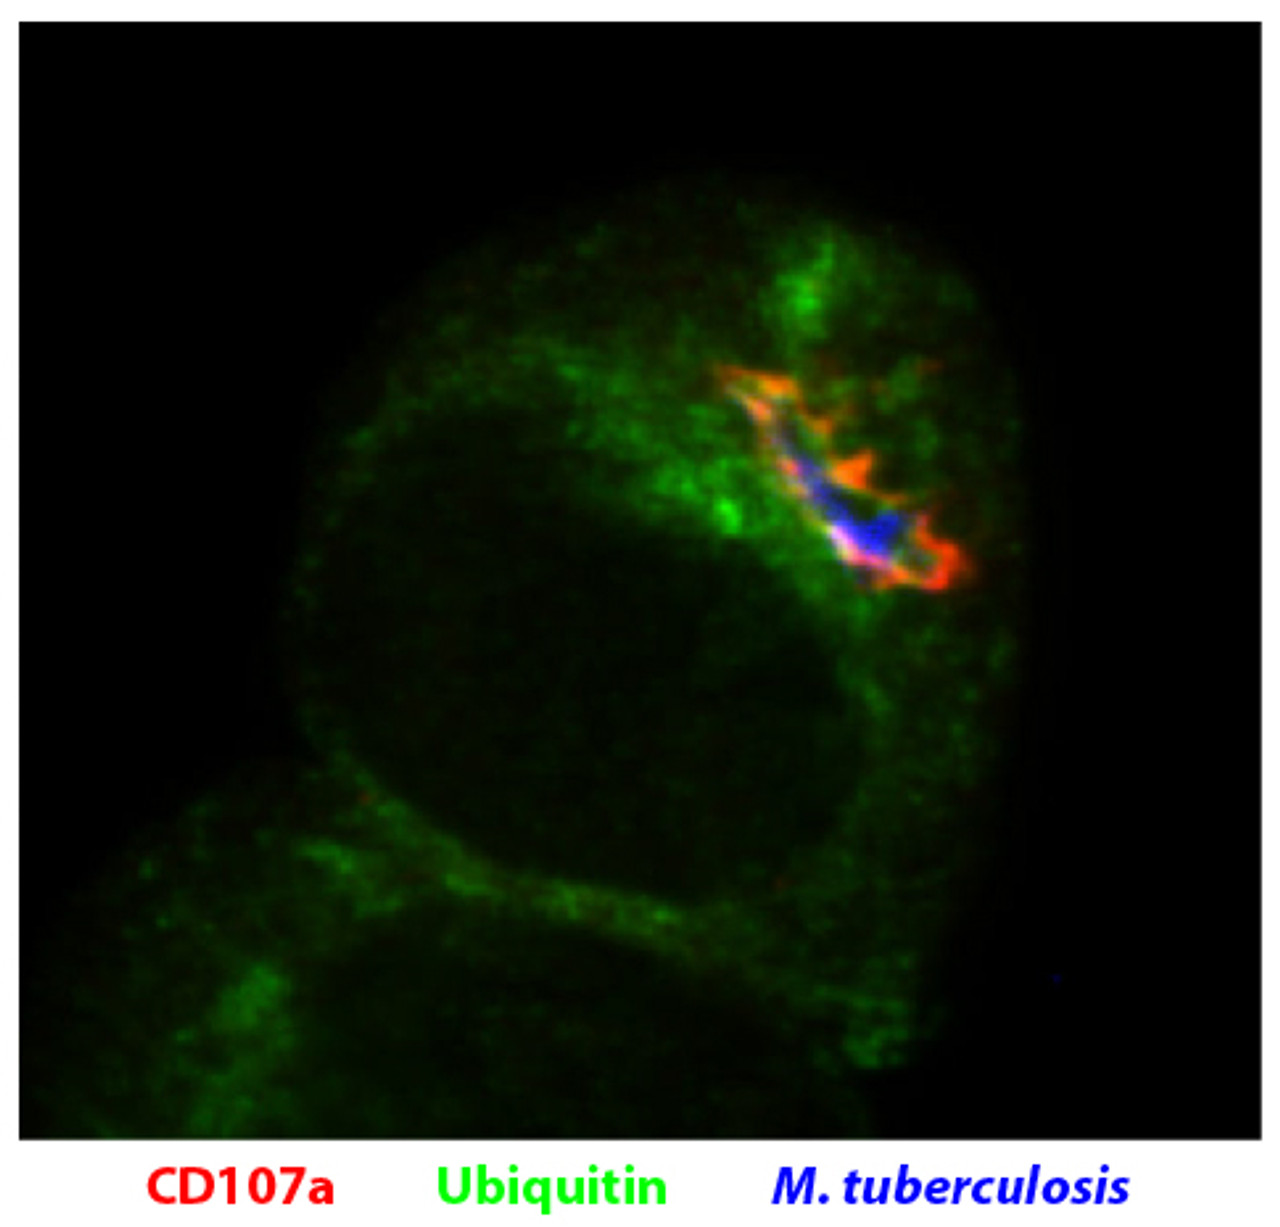 DC2.4 cells were infected with AF405 labeled M. tuberculosis and stained with Rat Anti-Mouse CD107a-UNLB (Cat. No. 99-109) and anti-ubiquitin followed by secondary antibodies.

Image from Seto S, Tsujimura K, Horii T, Koide Y. Autophagy adaptor protein p62-SQSTM1 and autophagy-related gene Atg5 mediate autophagosome formation in response to Mycobacterium tuberculosis infection in dendritic cells. PLoS One. 2013;8 (12) :e86017. Figure 4 (c)